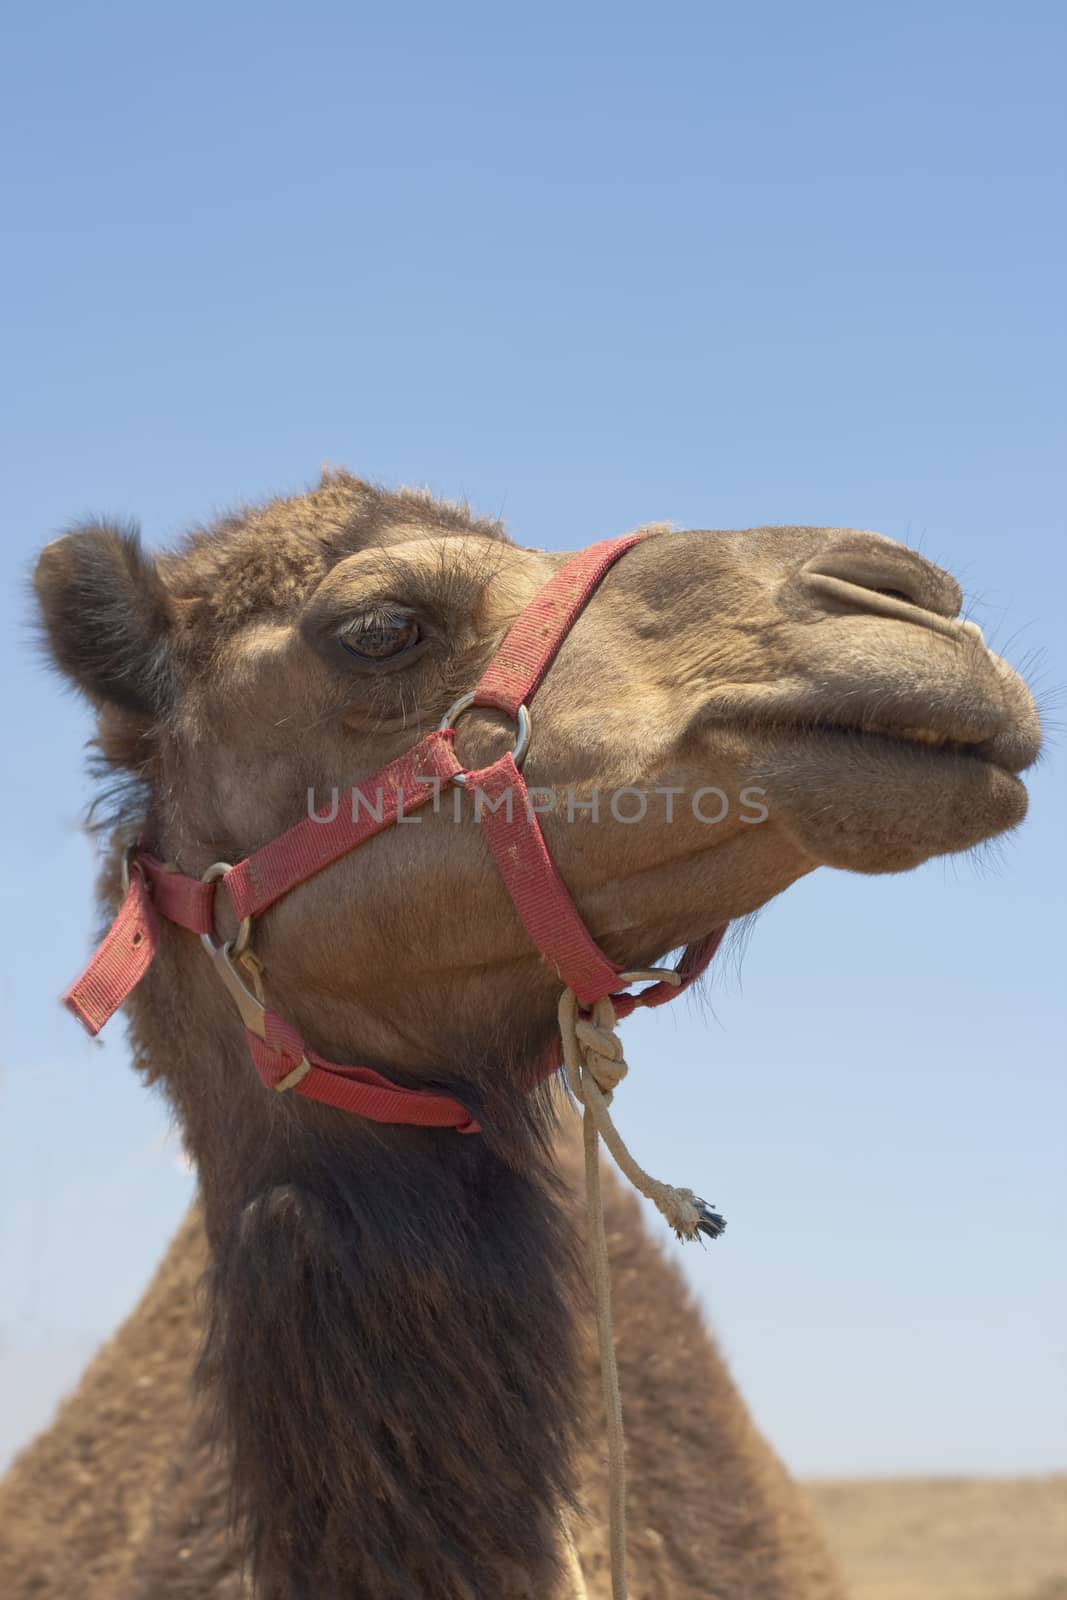 camel head close-up on blue sky background focus on the eye